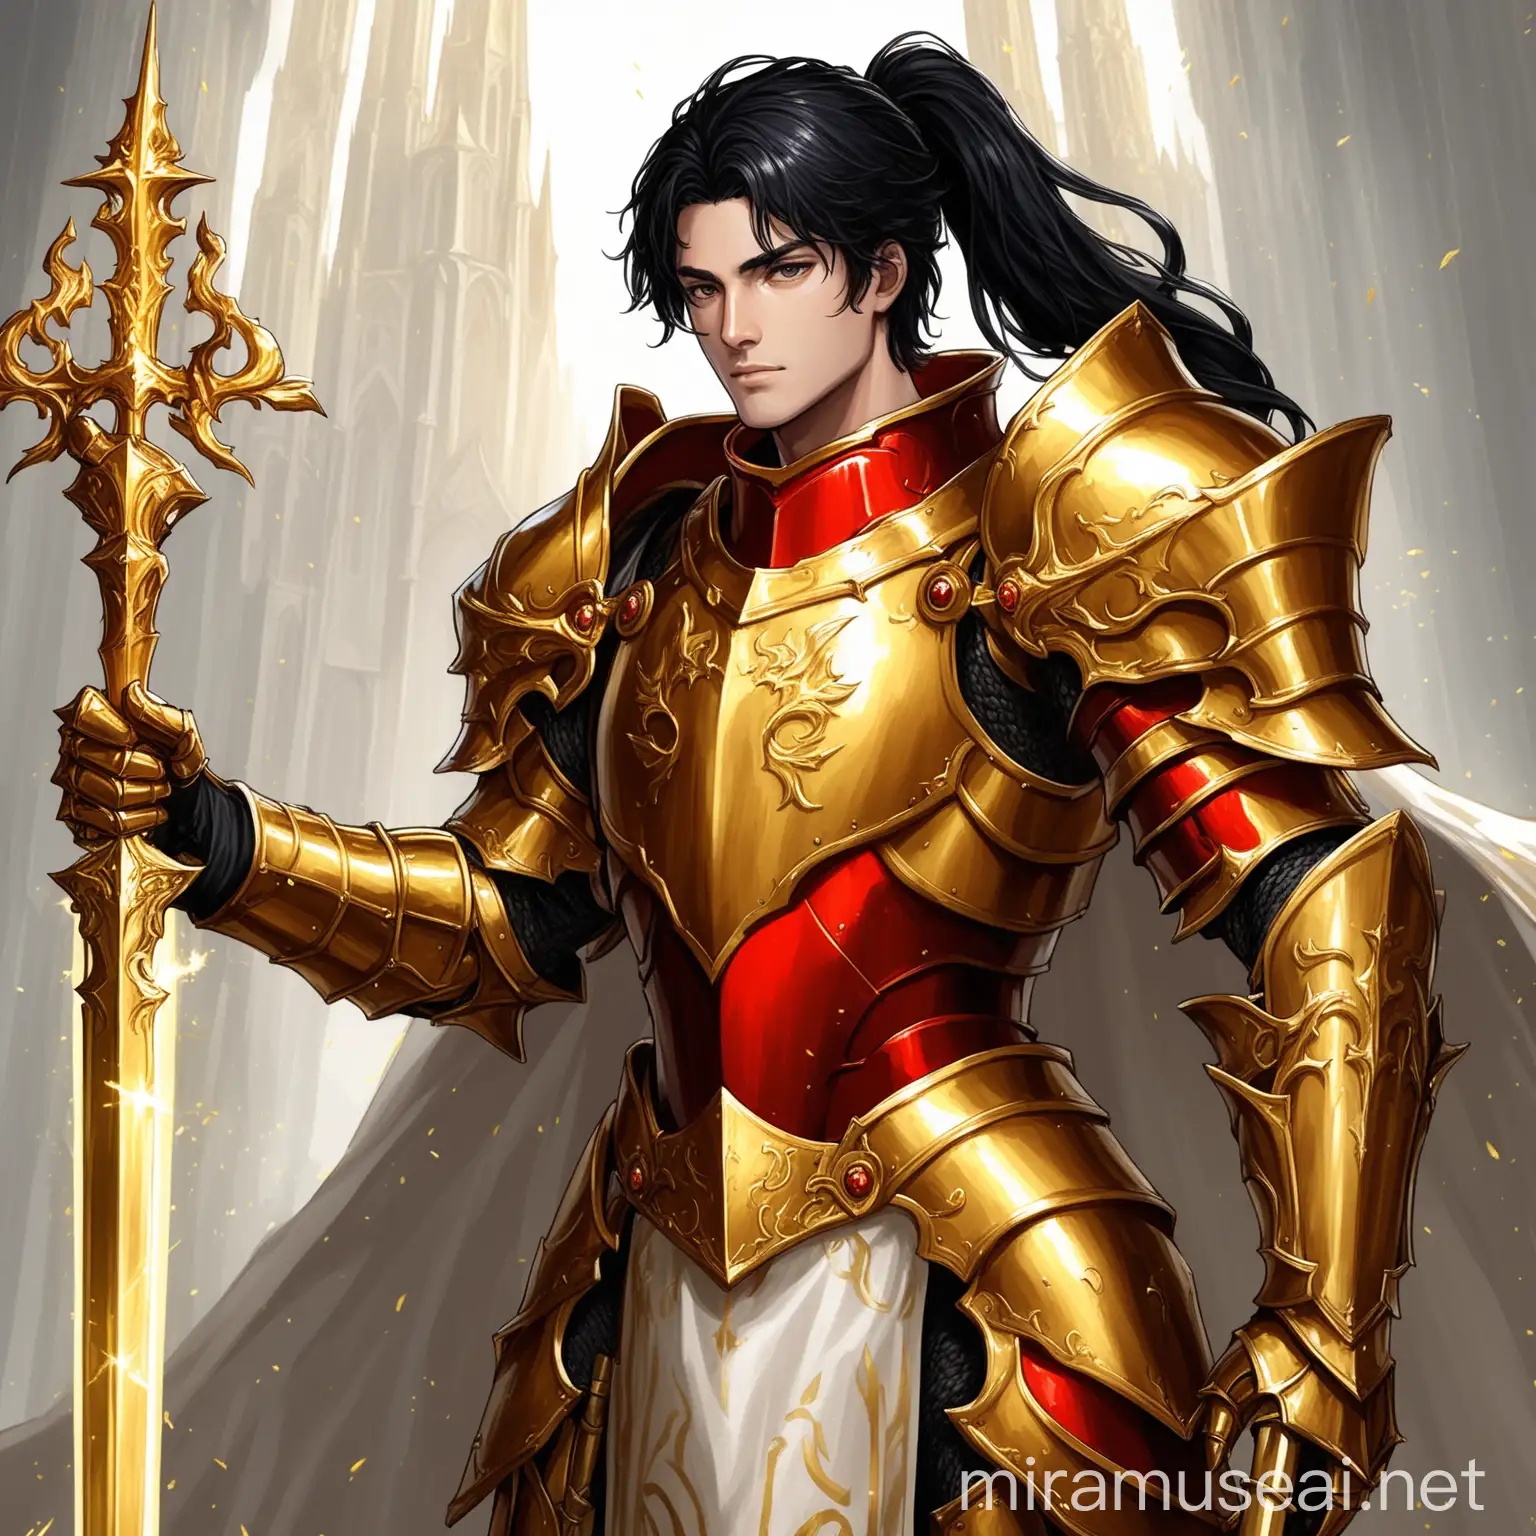 Golden Armored Paladin with Sword and Scepter